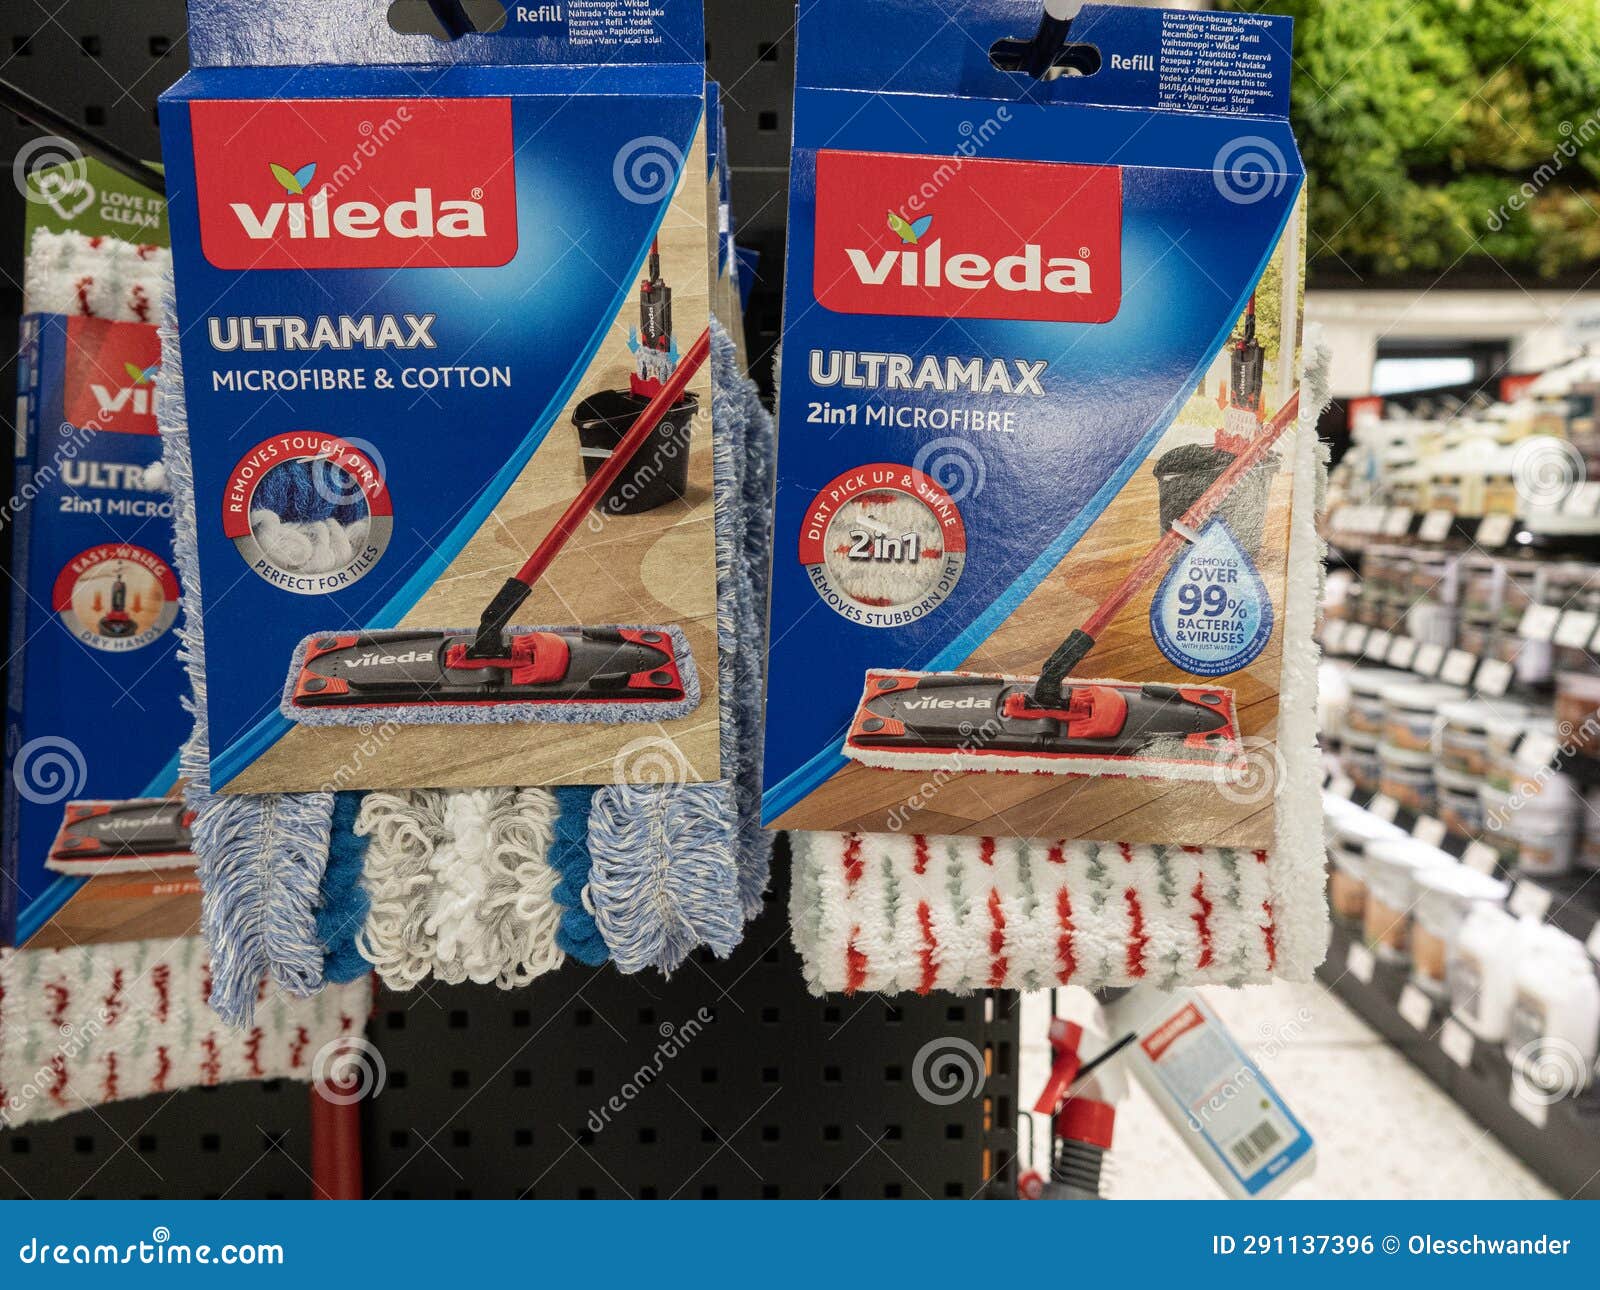 Vileda Ultramax Mops on a Shelf in a Store. Editorial Photo - Image of  market, neatness: 291137396